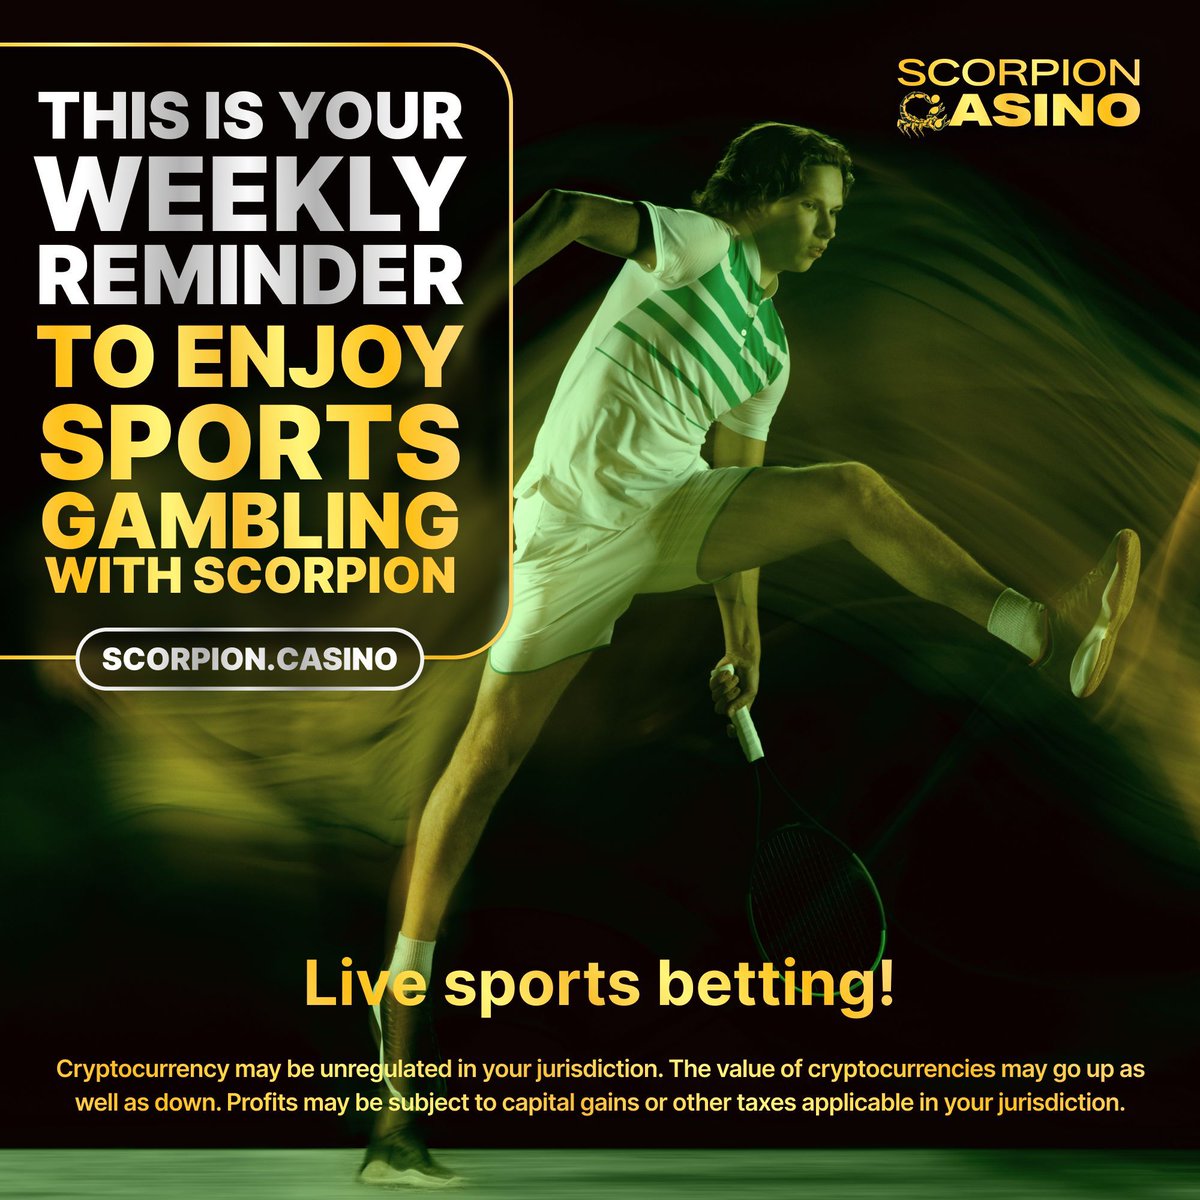 Unlock your financial freedom at Scorpion Casino! 🏆💰 Dive in, play big, and embrace the lifestyle you've always dreamed of. ⭐️ 🔥 Buy now on Pancakeswap here: buff.ly/3UlwSpf 🔥 Trade $SCORP on XT now: buff.ly/3JKvvdP #ScorpionCasino #FinancialFreedom